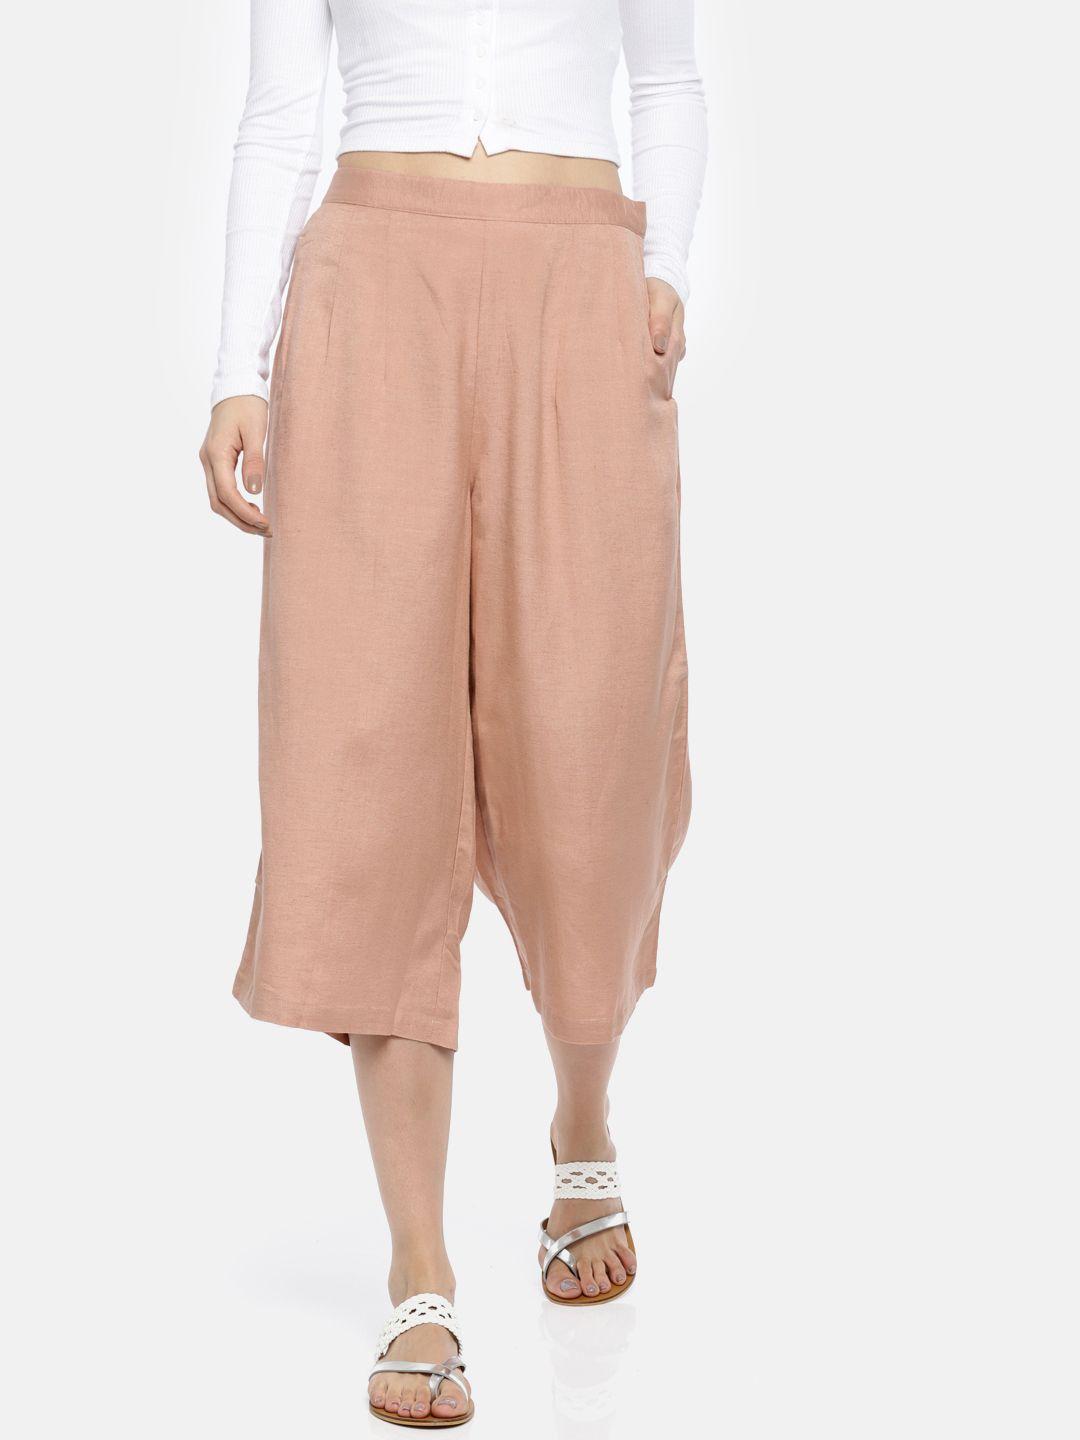 go colors women peach-coloured flared solid culottes